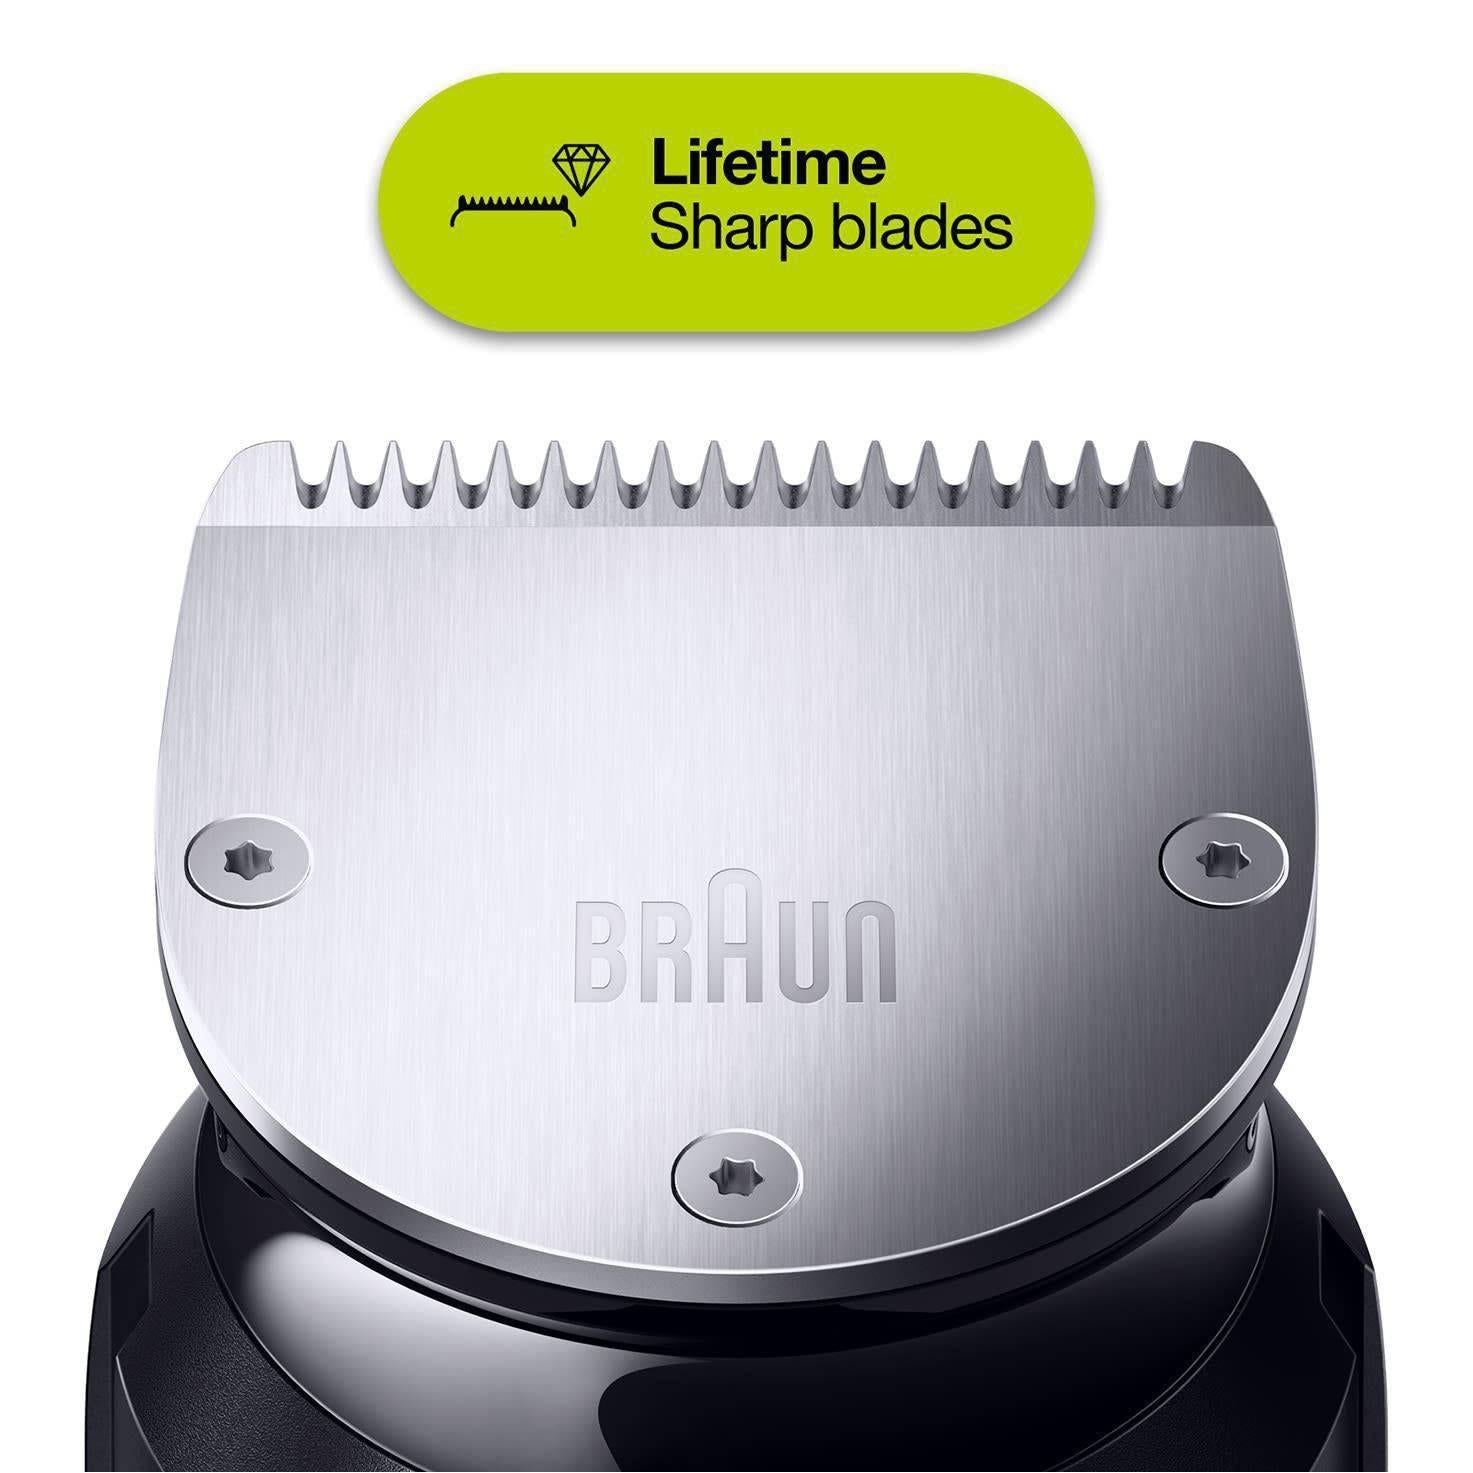 Braun Beard Trimmer BT7240 with Precision Dial - 4 Attachments, Gillette Razor - Healthxpress.ie